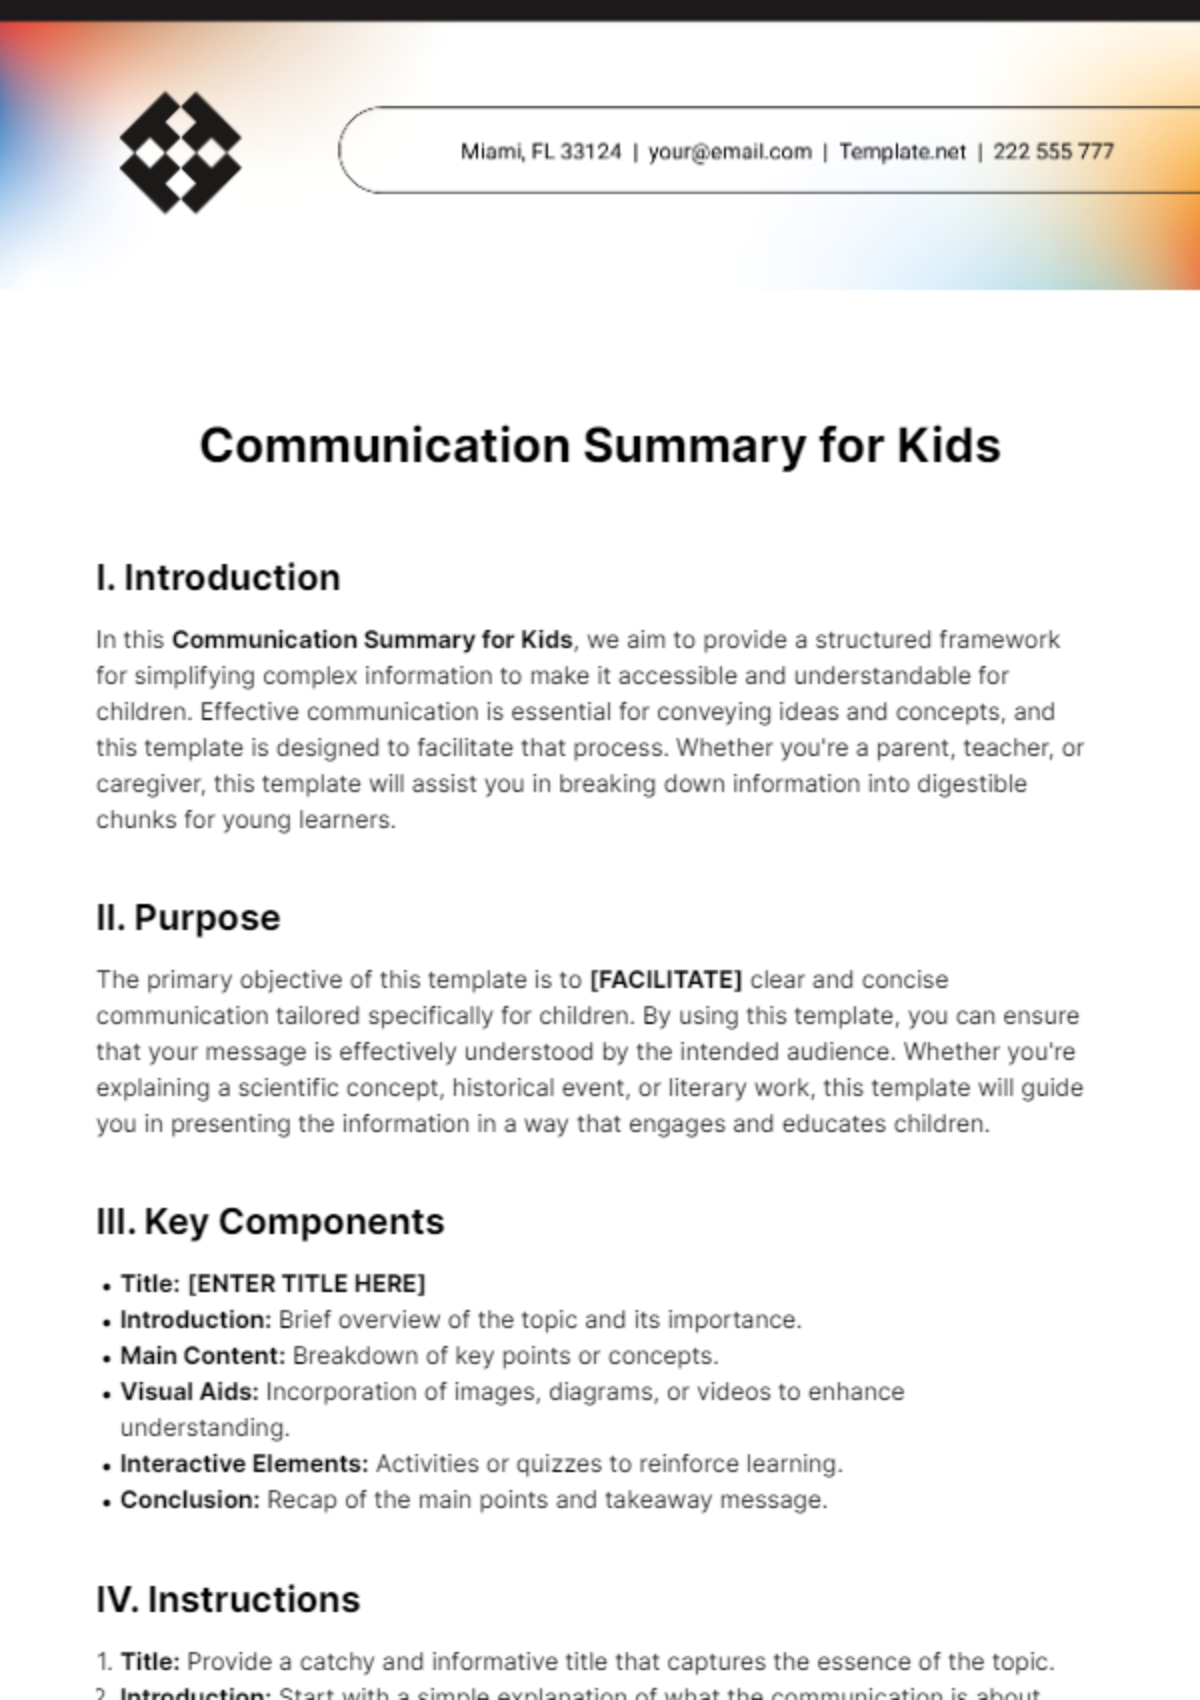 Communication Summary for Kids Template